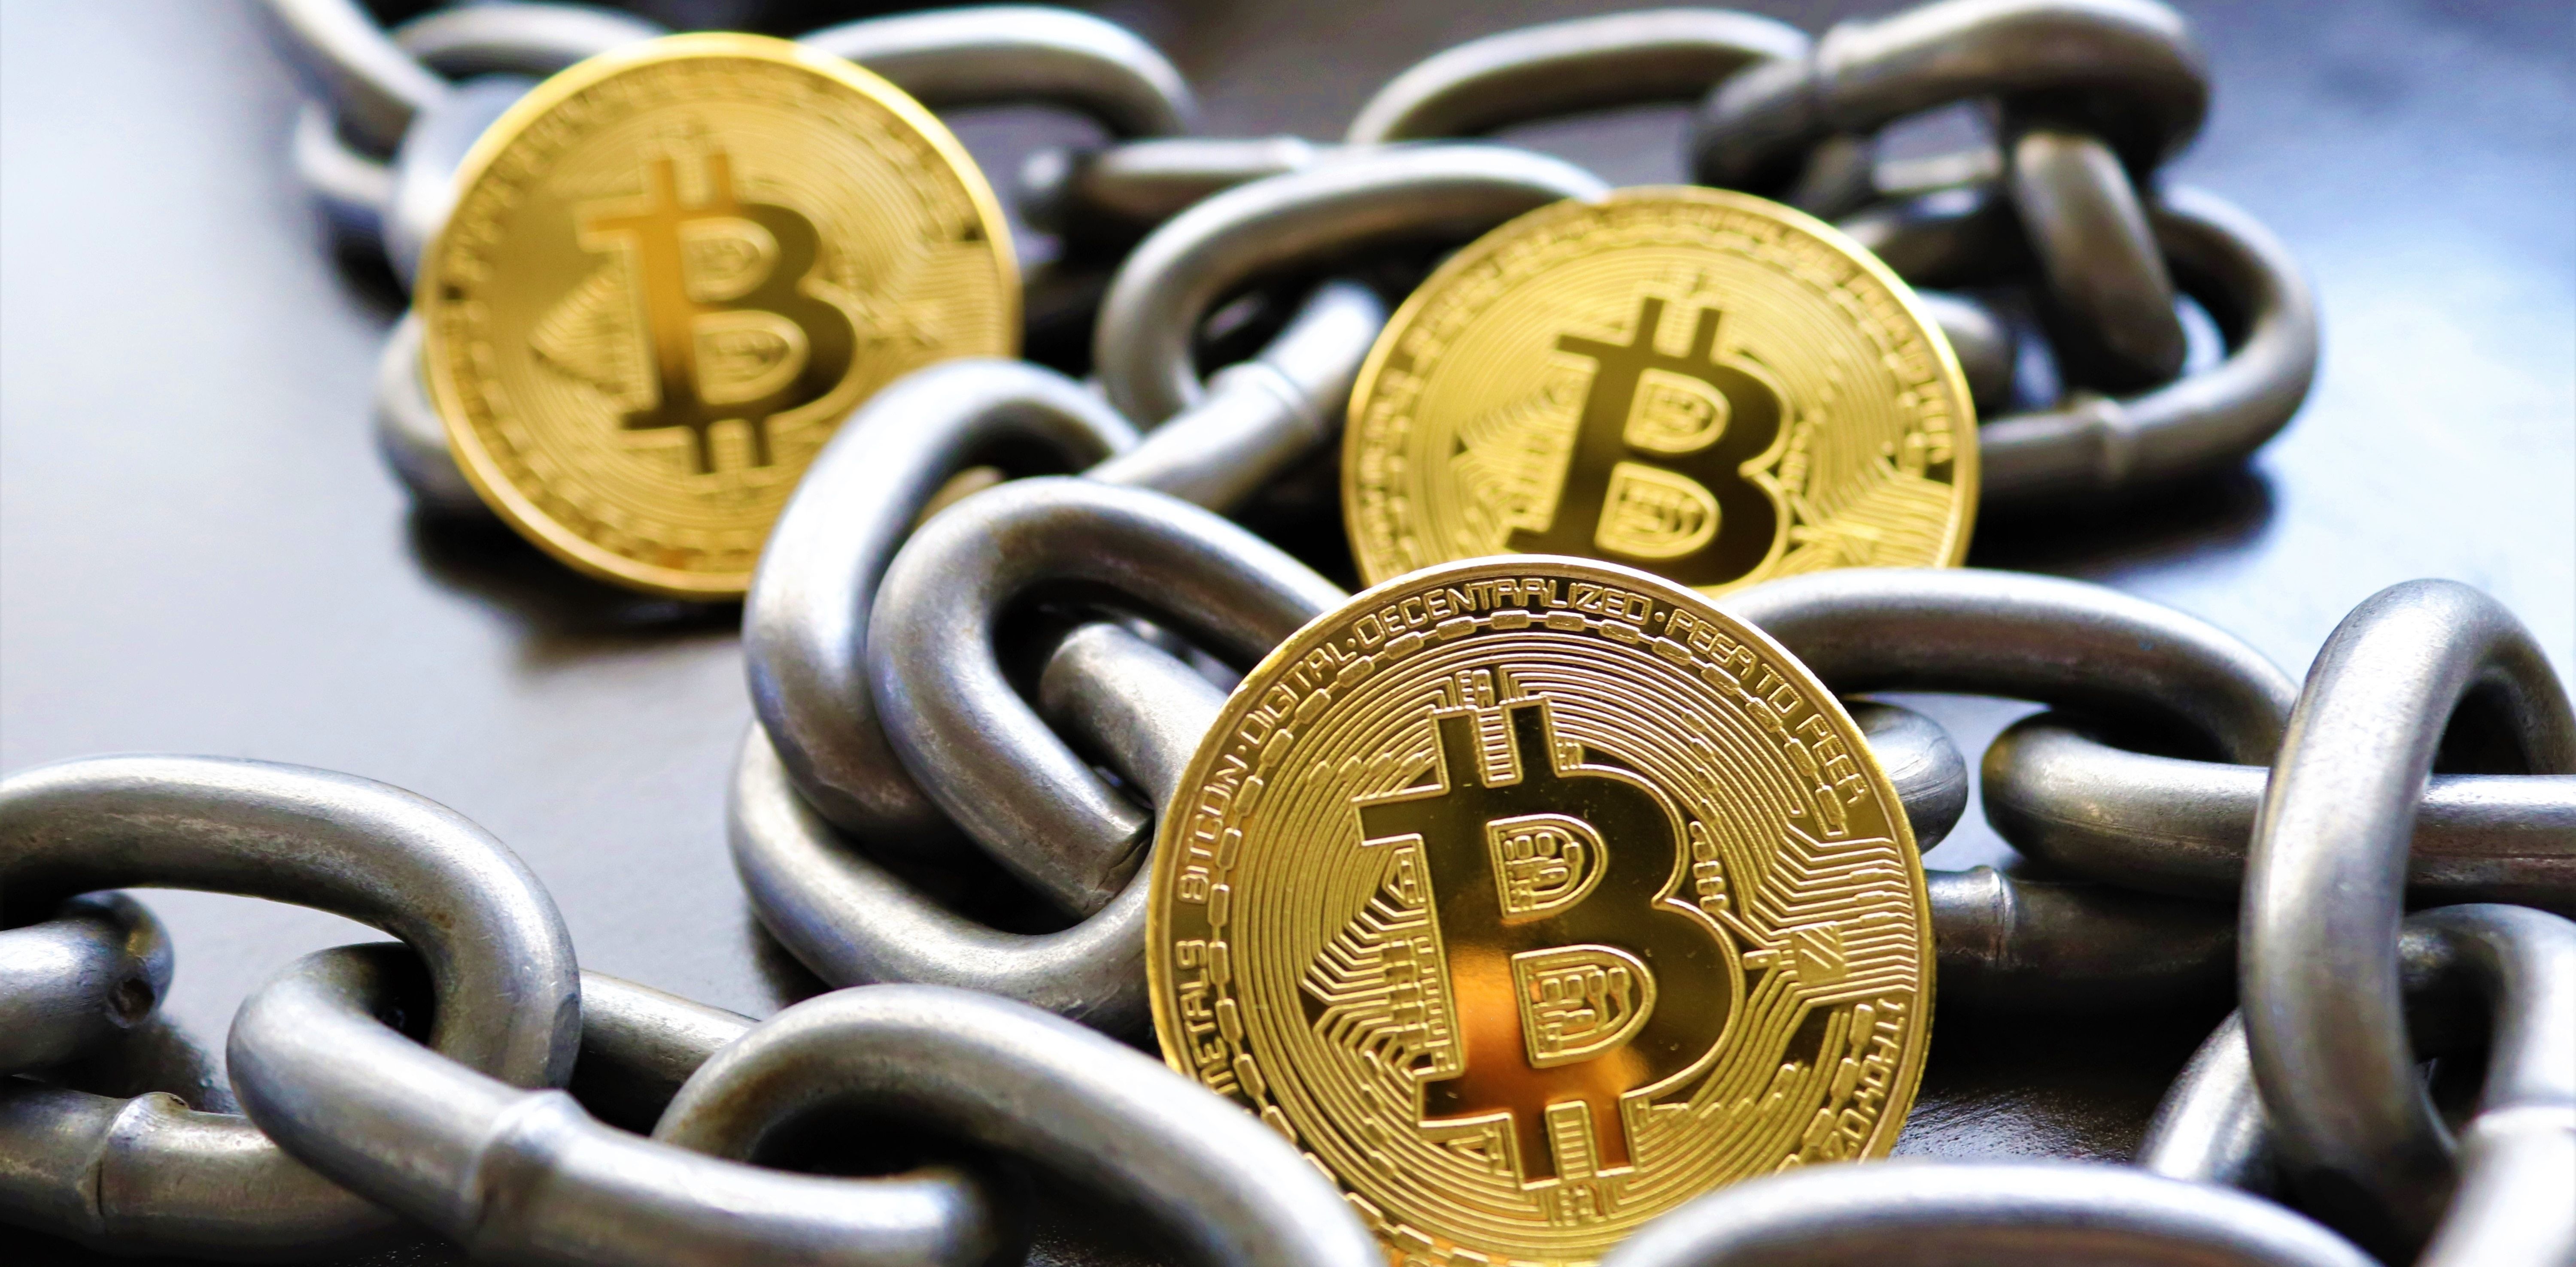 bitcoins and silver chain on desk